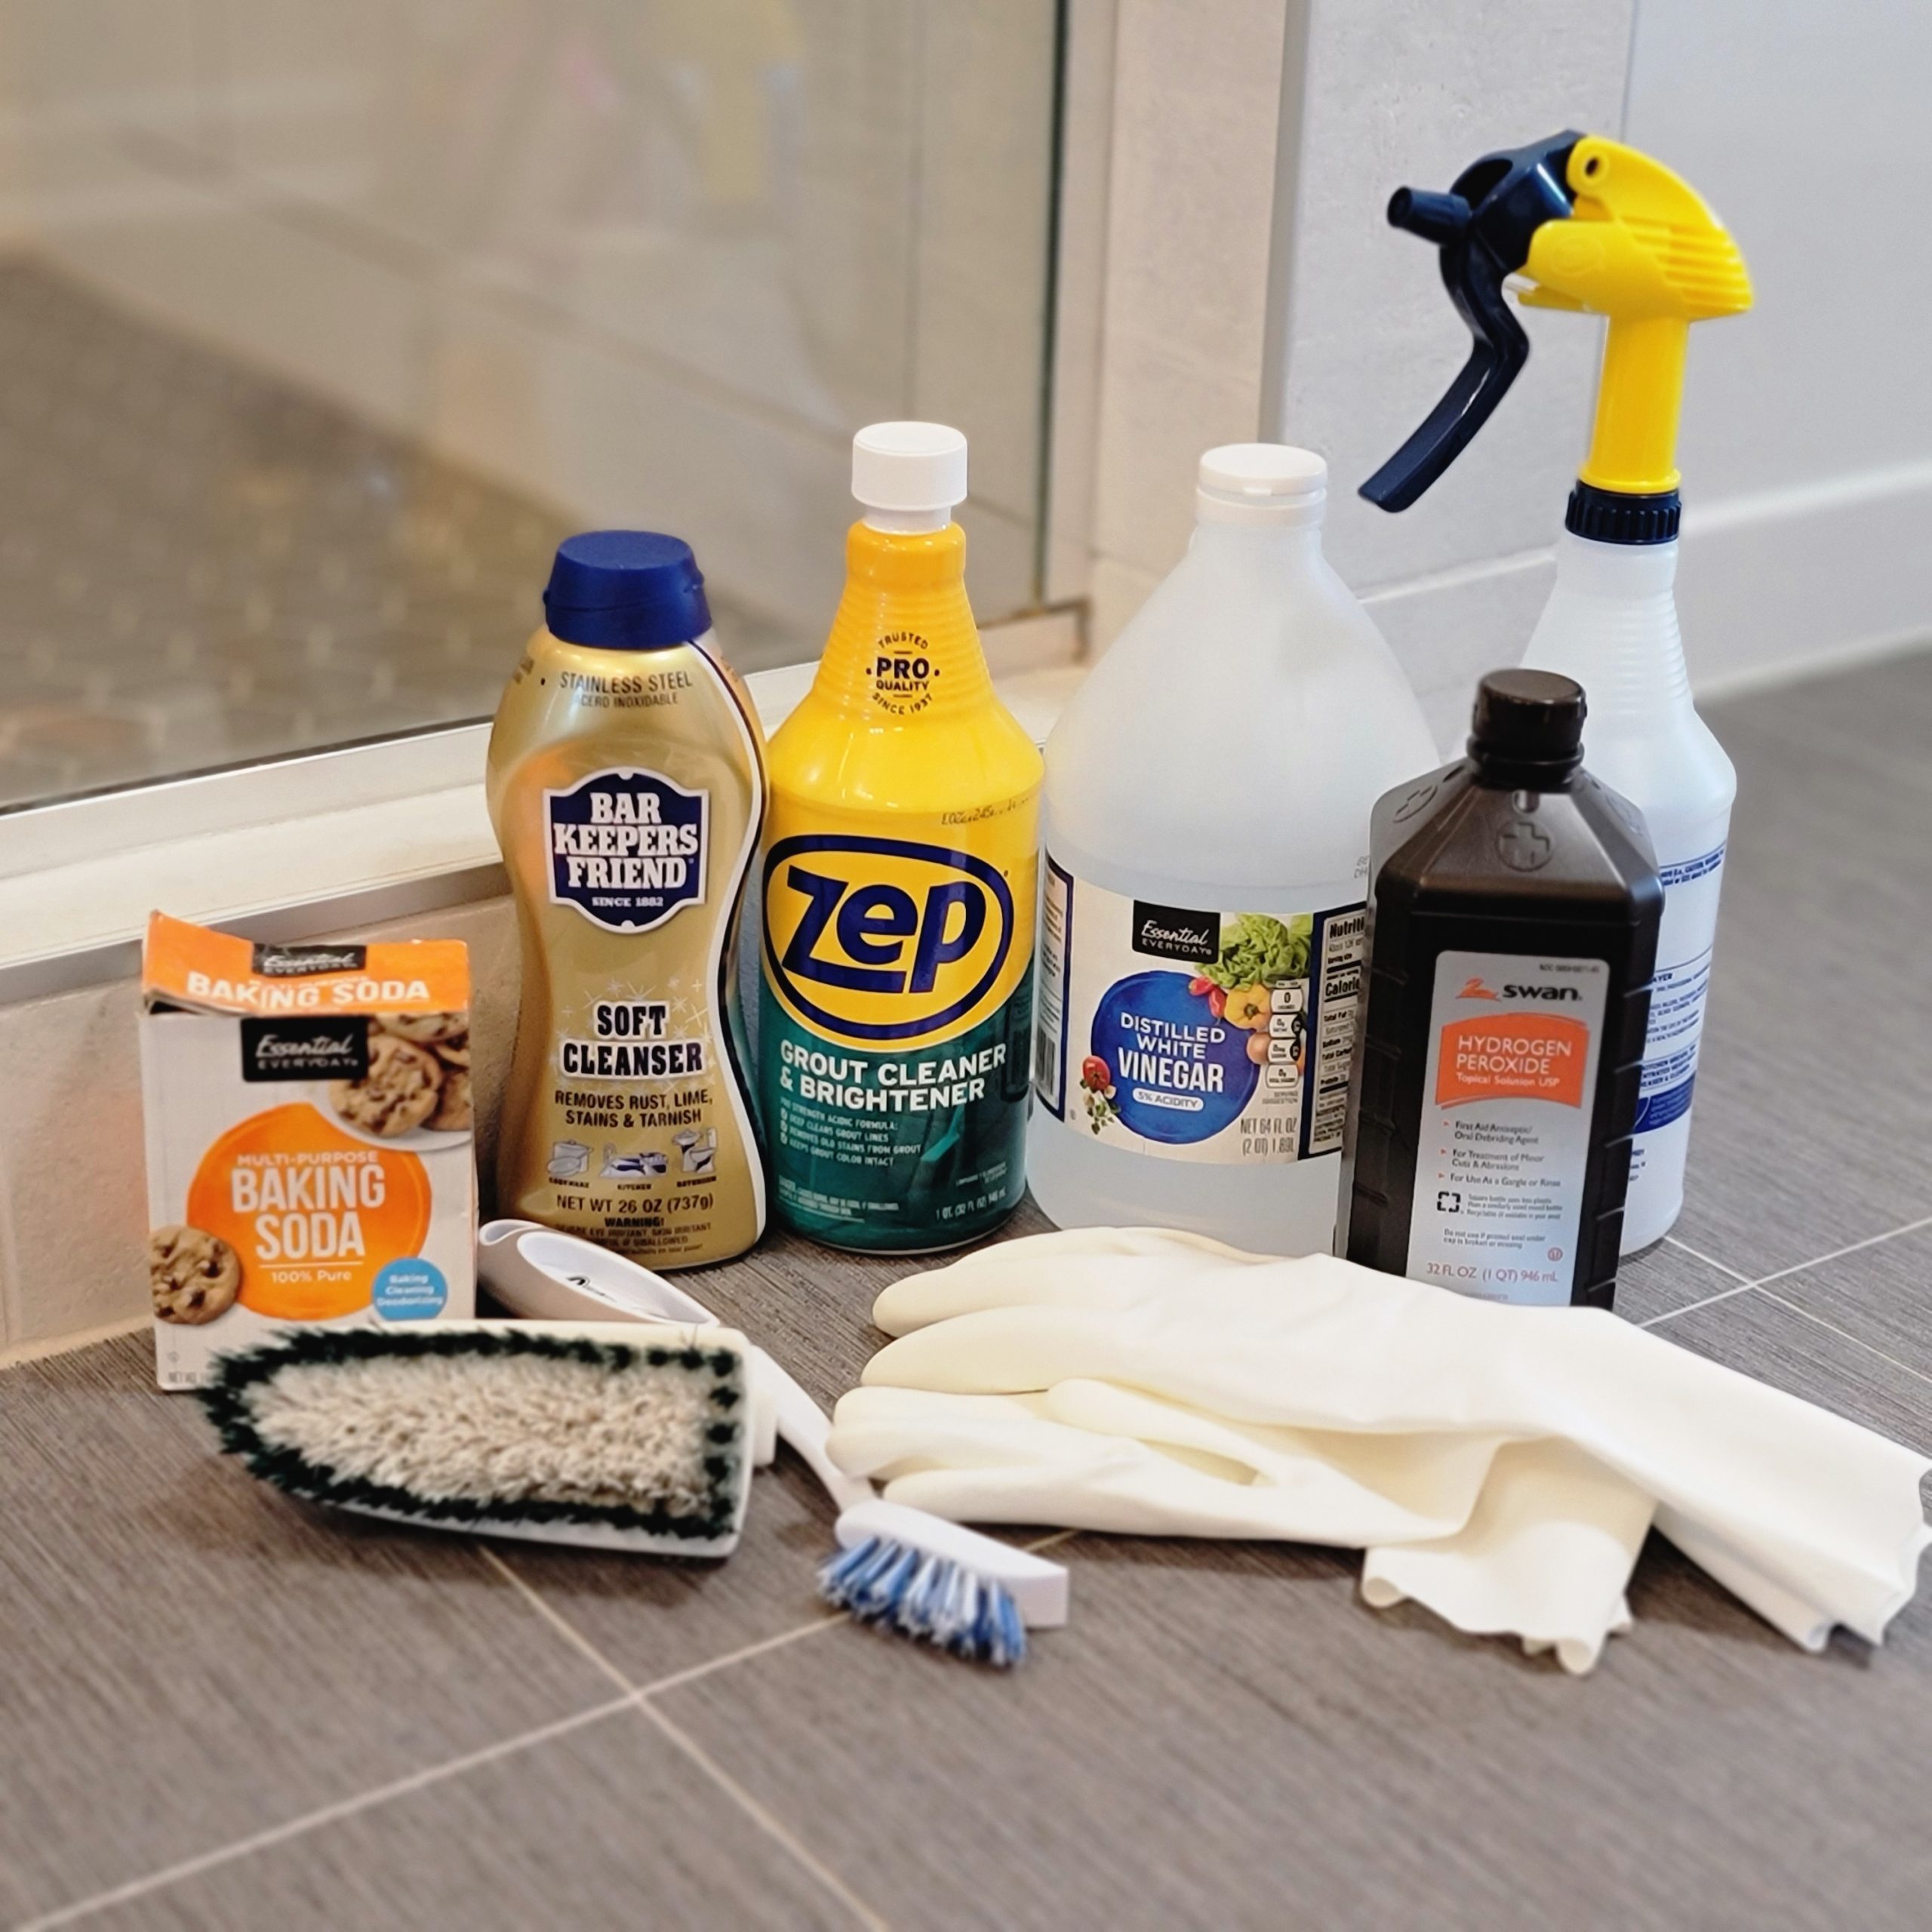 Best Cleaning Products 2021: Zep Grout Cleaner and Safely